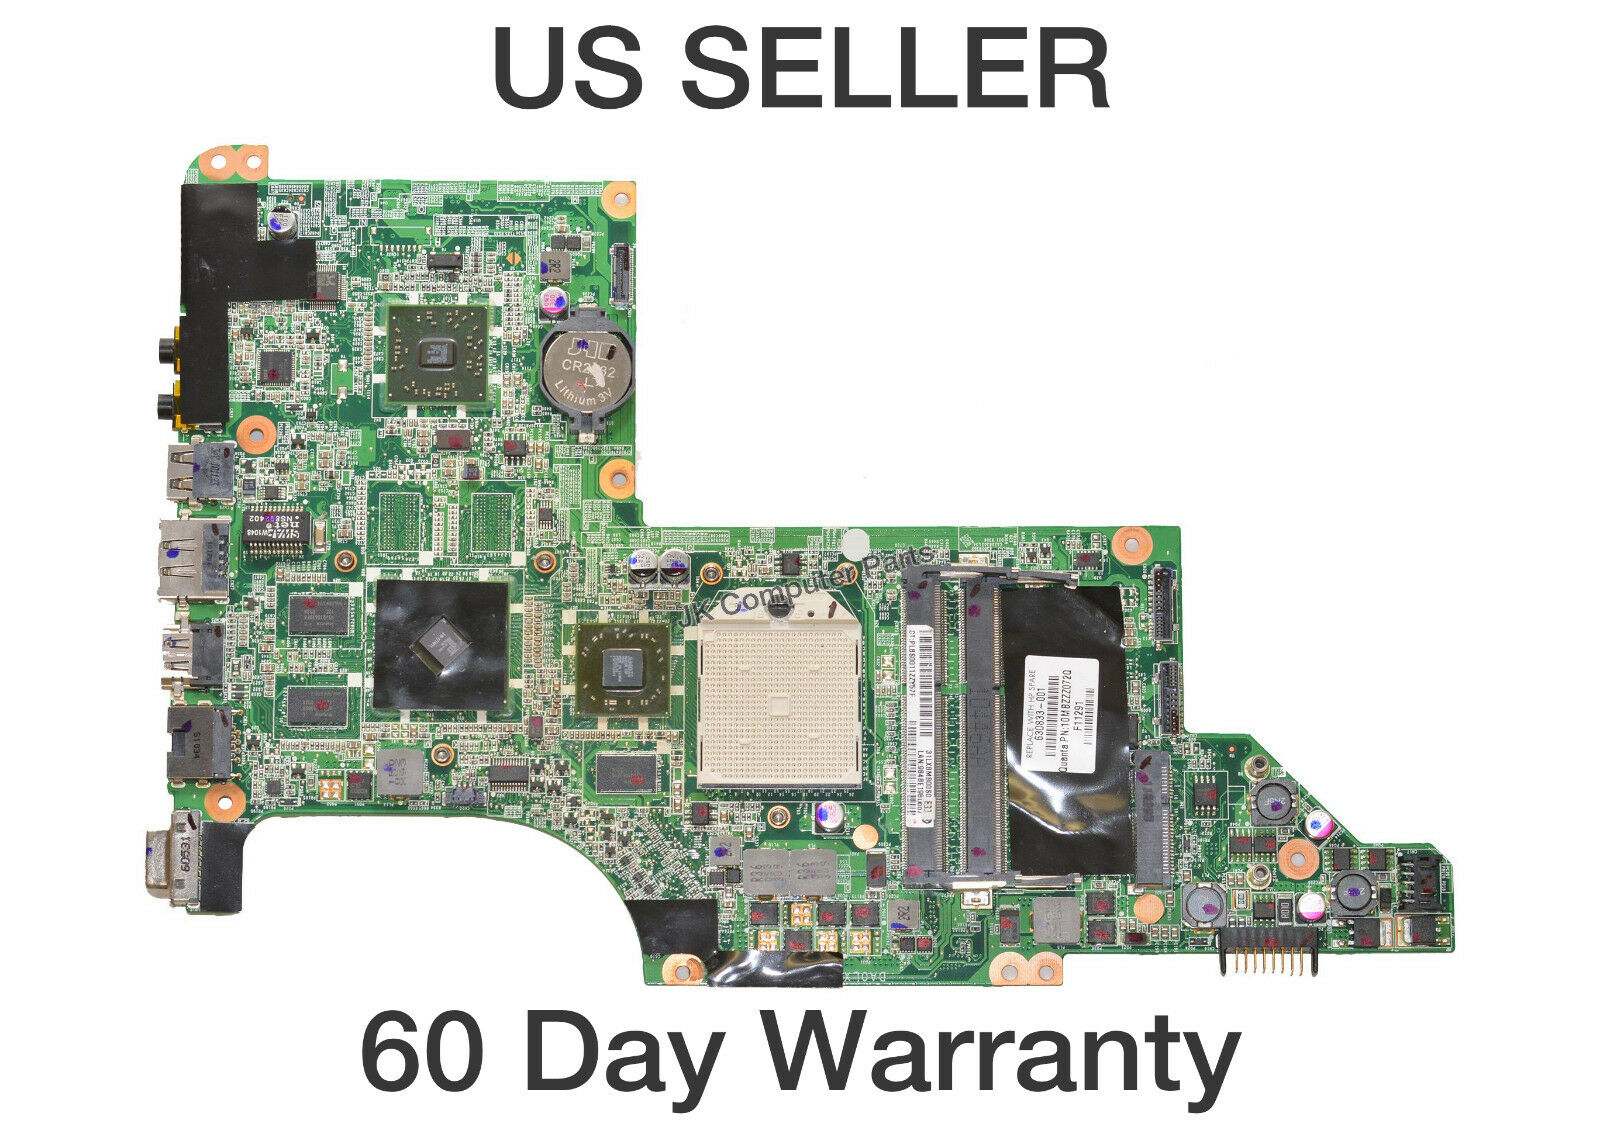 HP DV7-4000 AMD Laptop Motherboard s1 630833-001 630833001 Brand: HP Compatible CPU Brand: AMD MPN: 630833